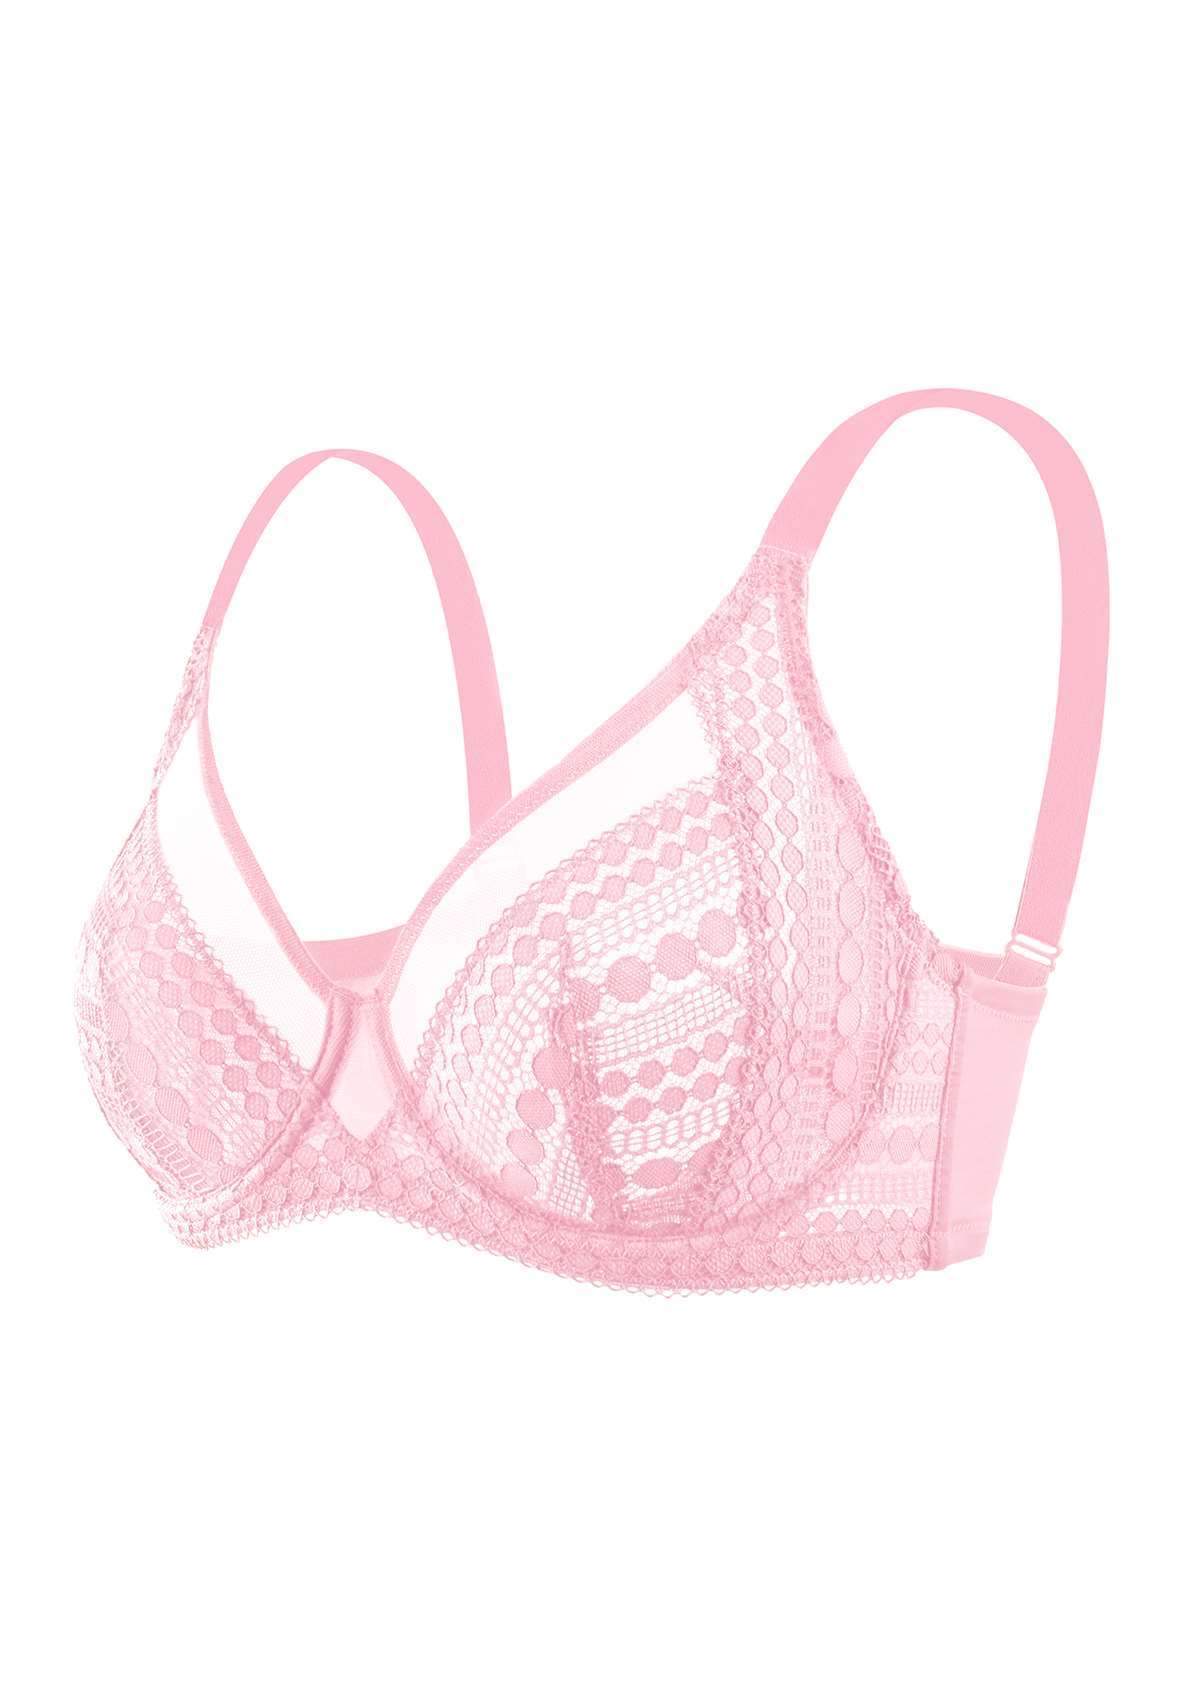 HSIA Heroine Lace Bra And Panties Set: Most Comfortable Supportive Bra - Pink / 38 / C